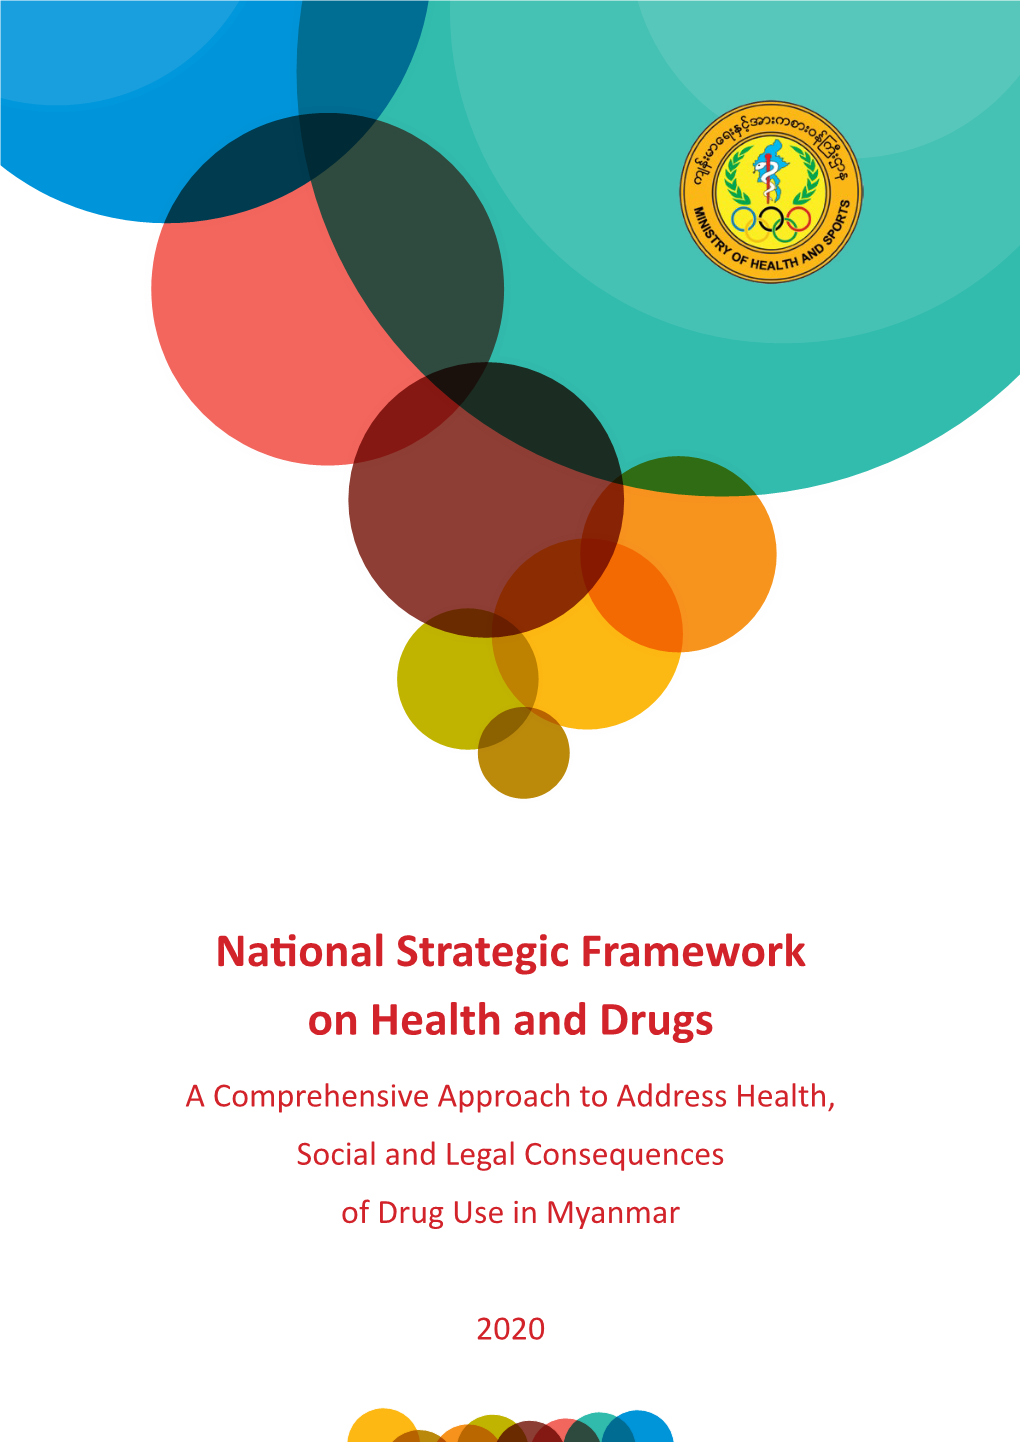 National Strategic Framework on Health and Drugs a Comprehensive Approach to Address Health, Social and Legal Consequences of Drug Use in Myanmar